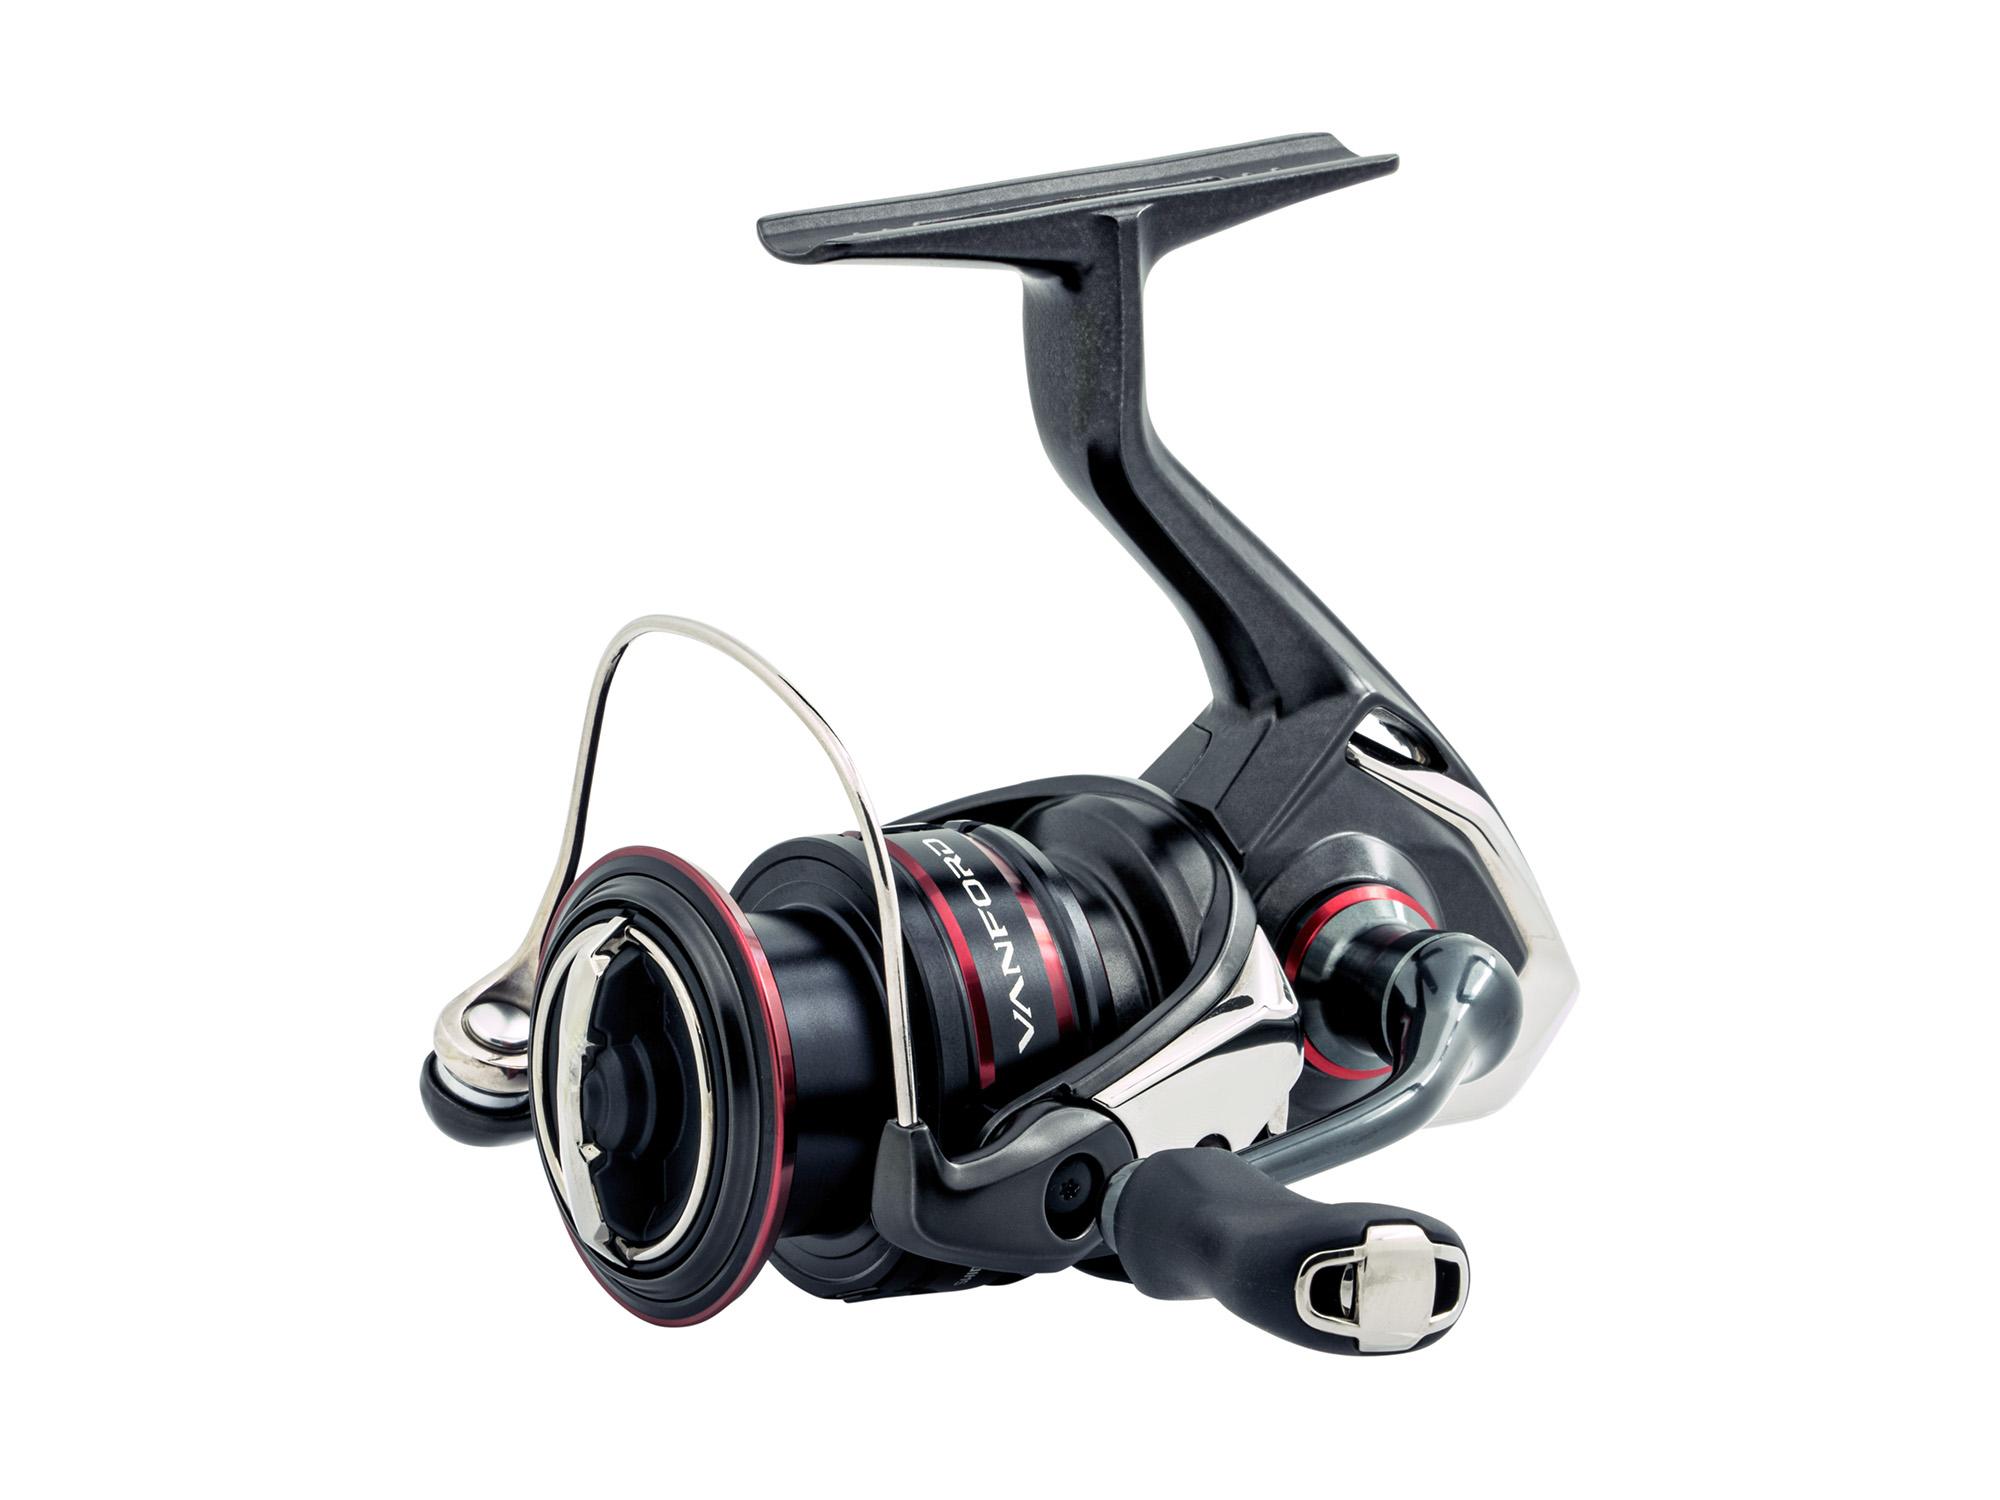 The Perfect Combo for Trout Fishing - Shimano Jewell Rod and Vanford Reel